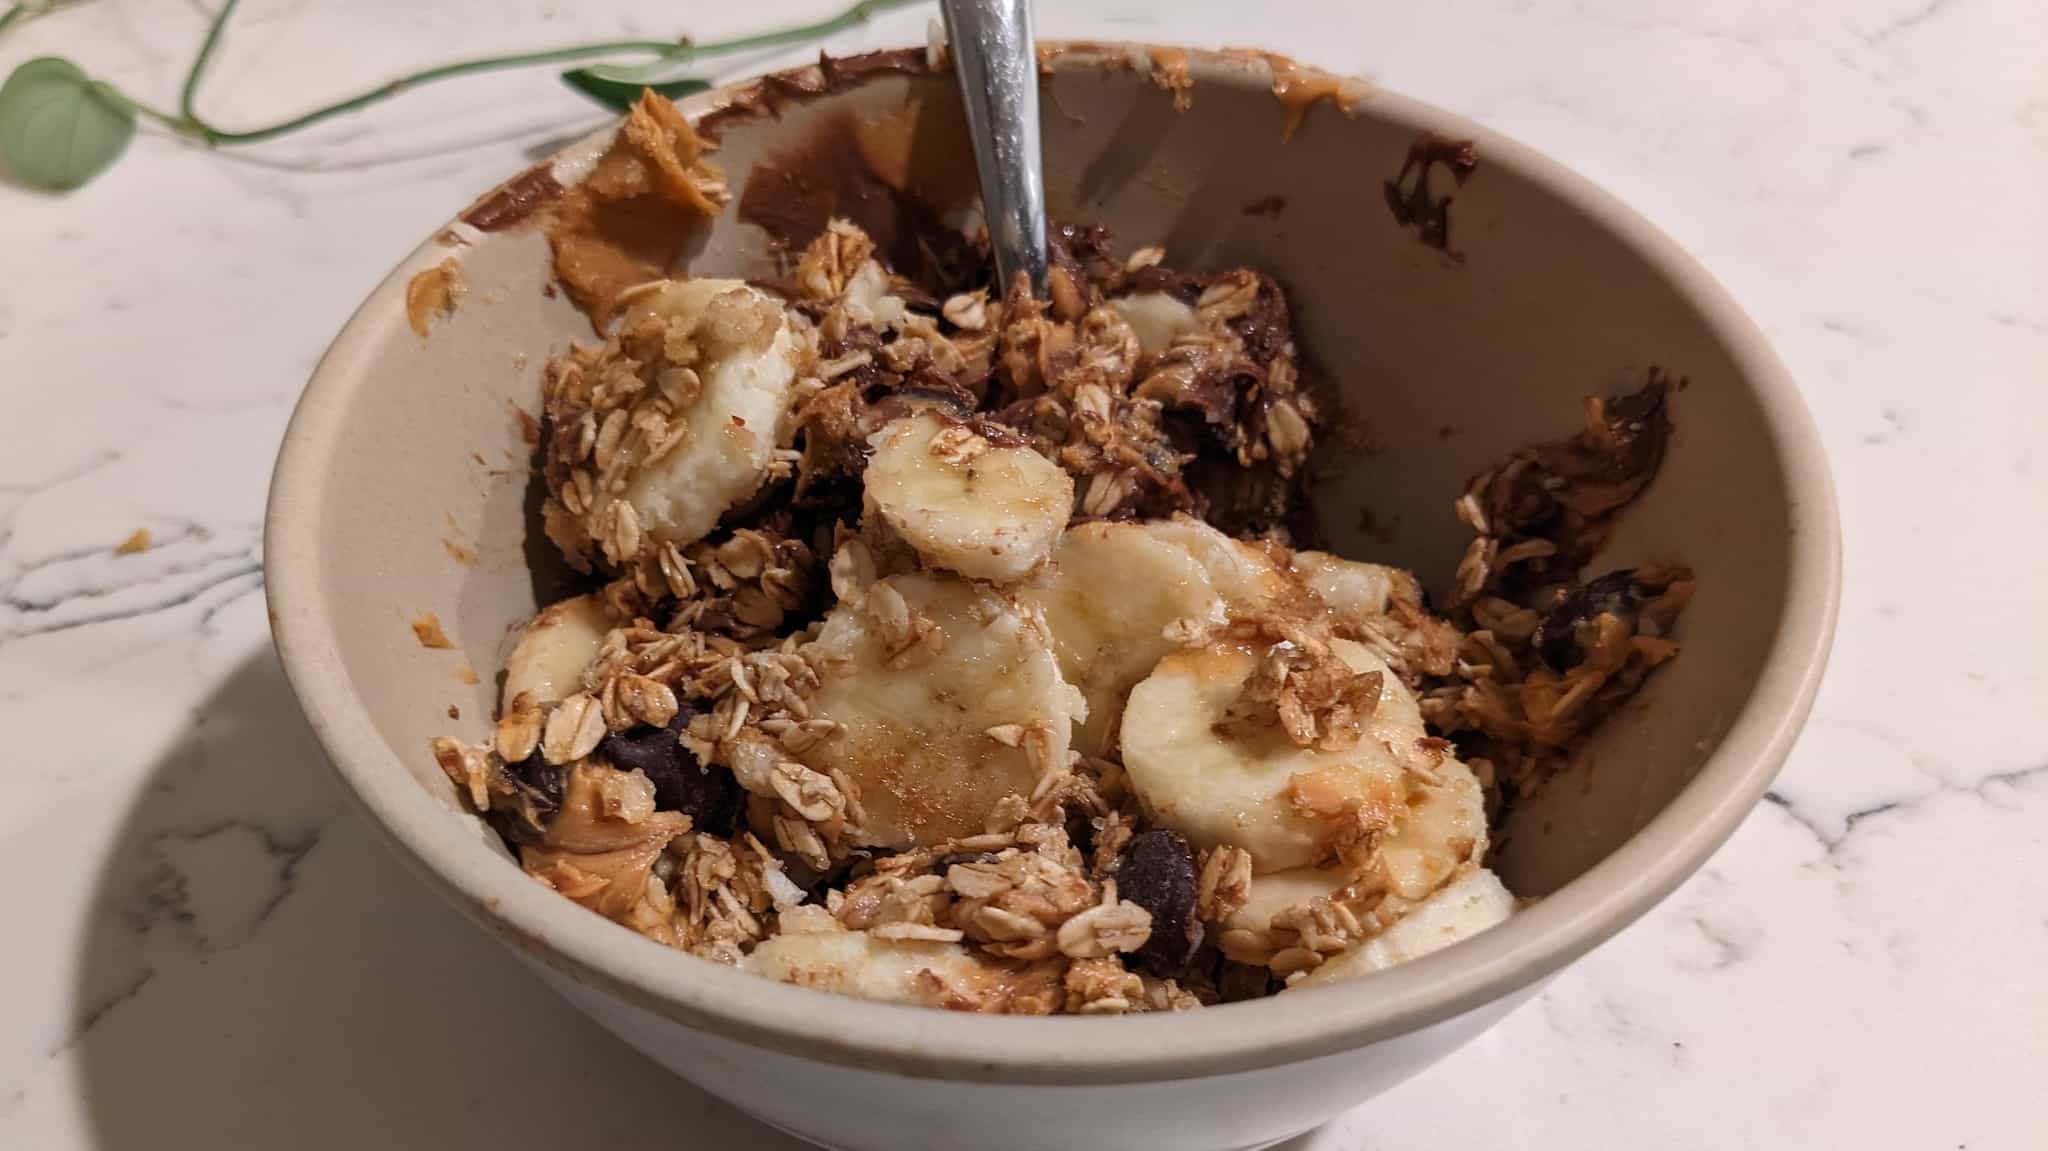 Bowl with banana slices topped with granola, peanut butter, and chocolate chips.